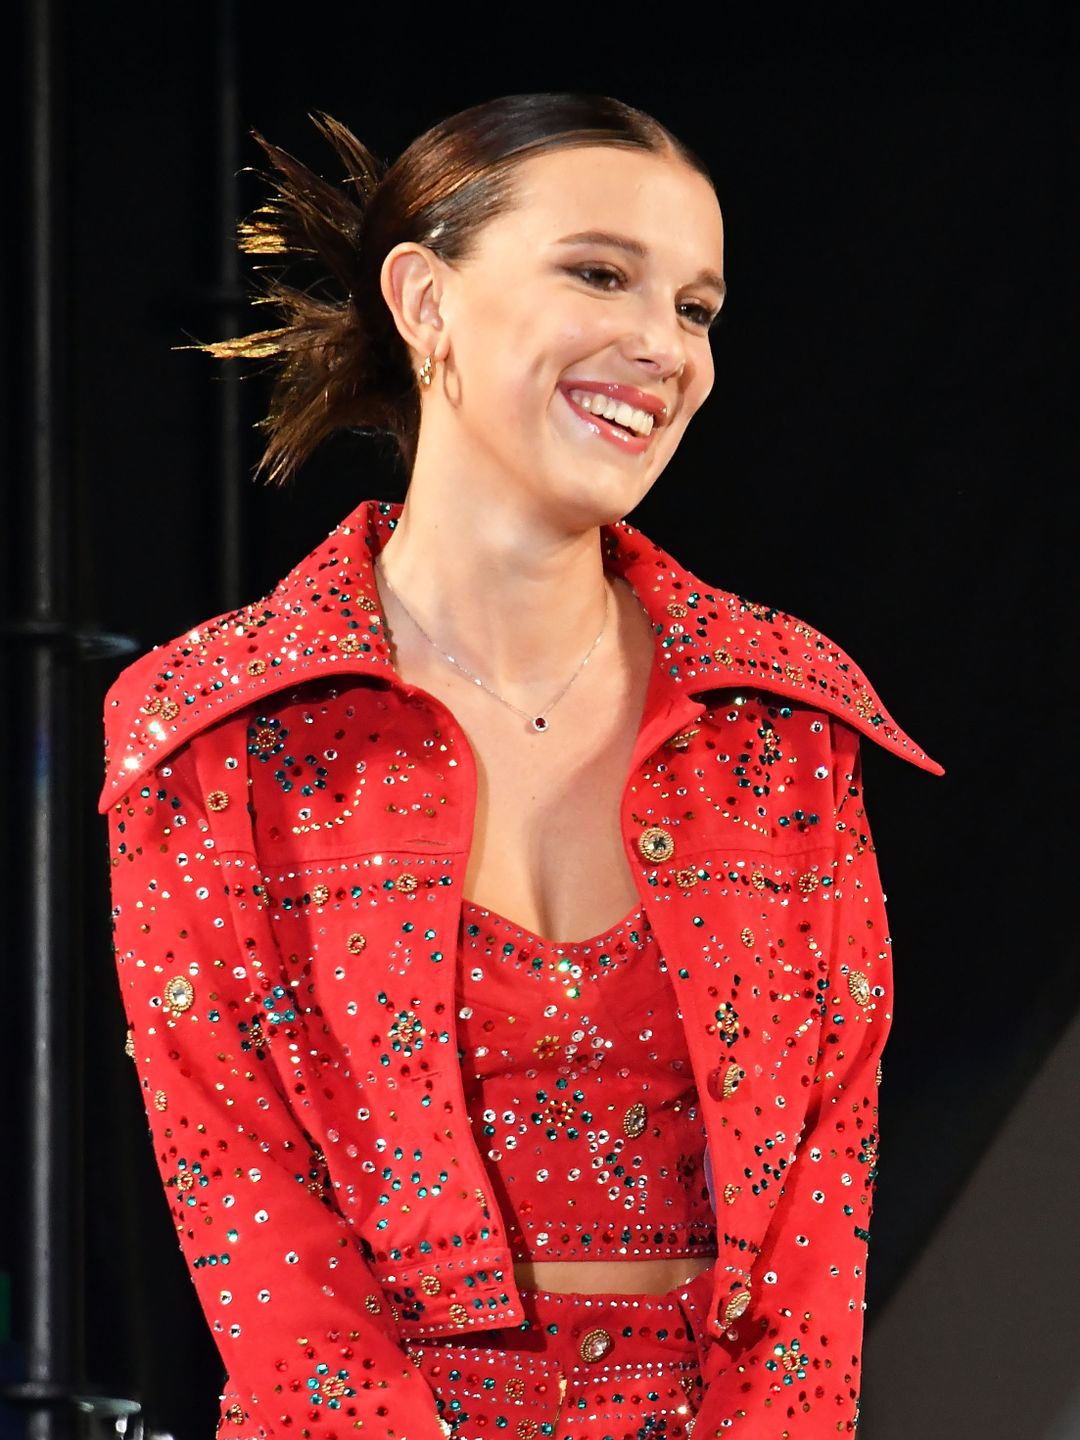 millie bobby brown smiling on stage